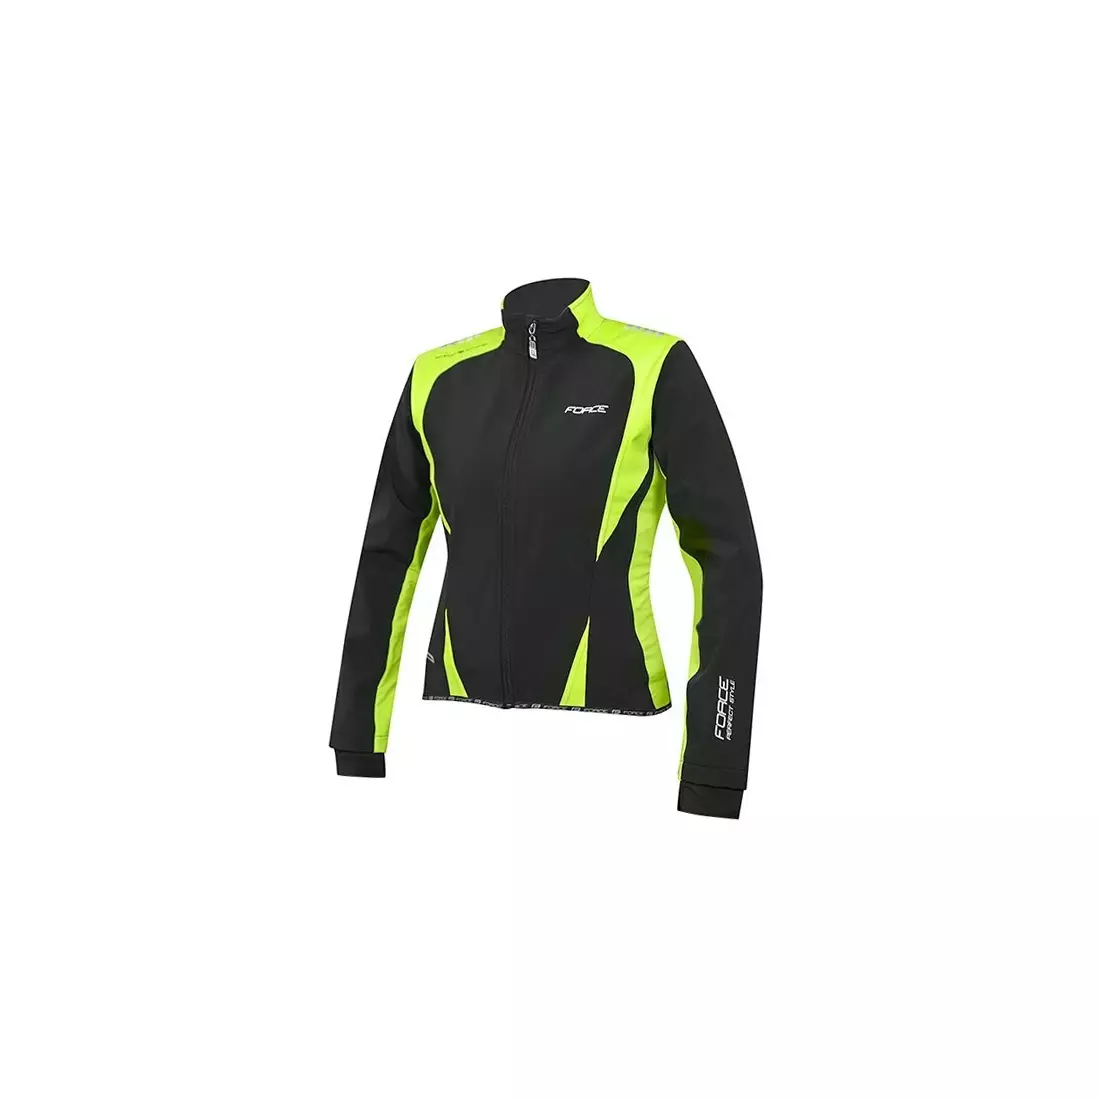 FORCE X71 - 89993 - women's insulated softshell jacket - color: Black-fluor